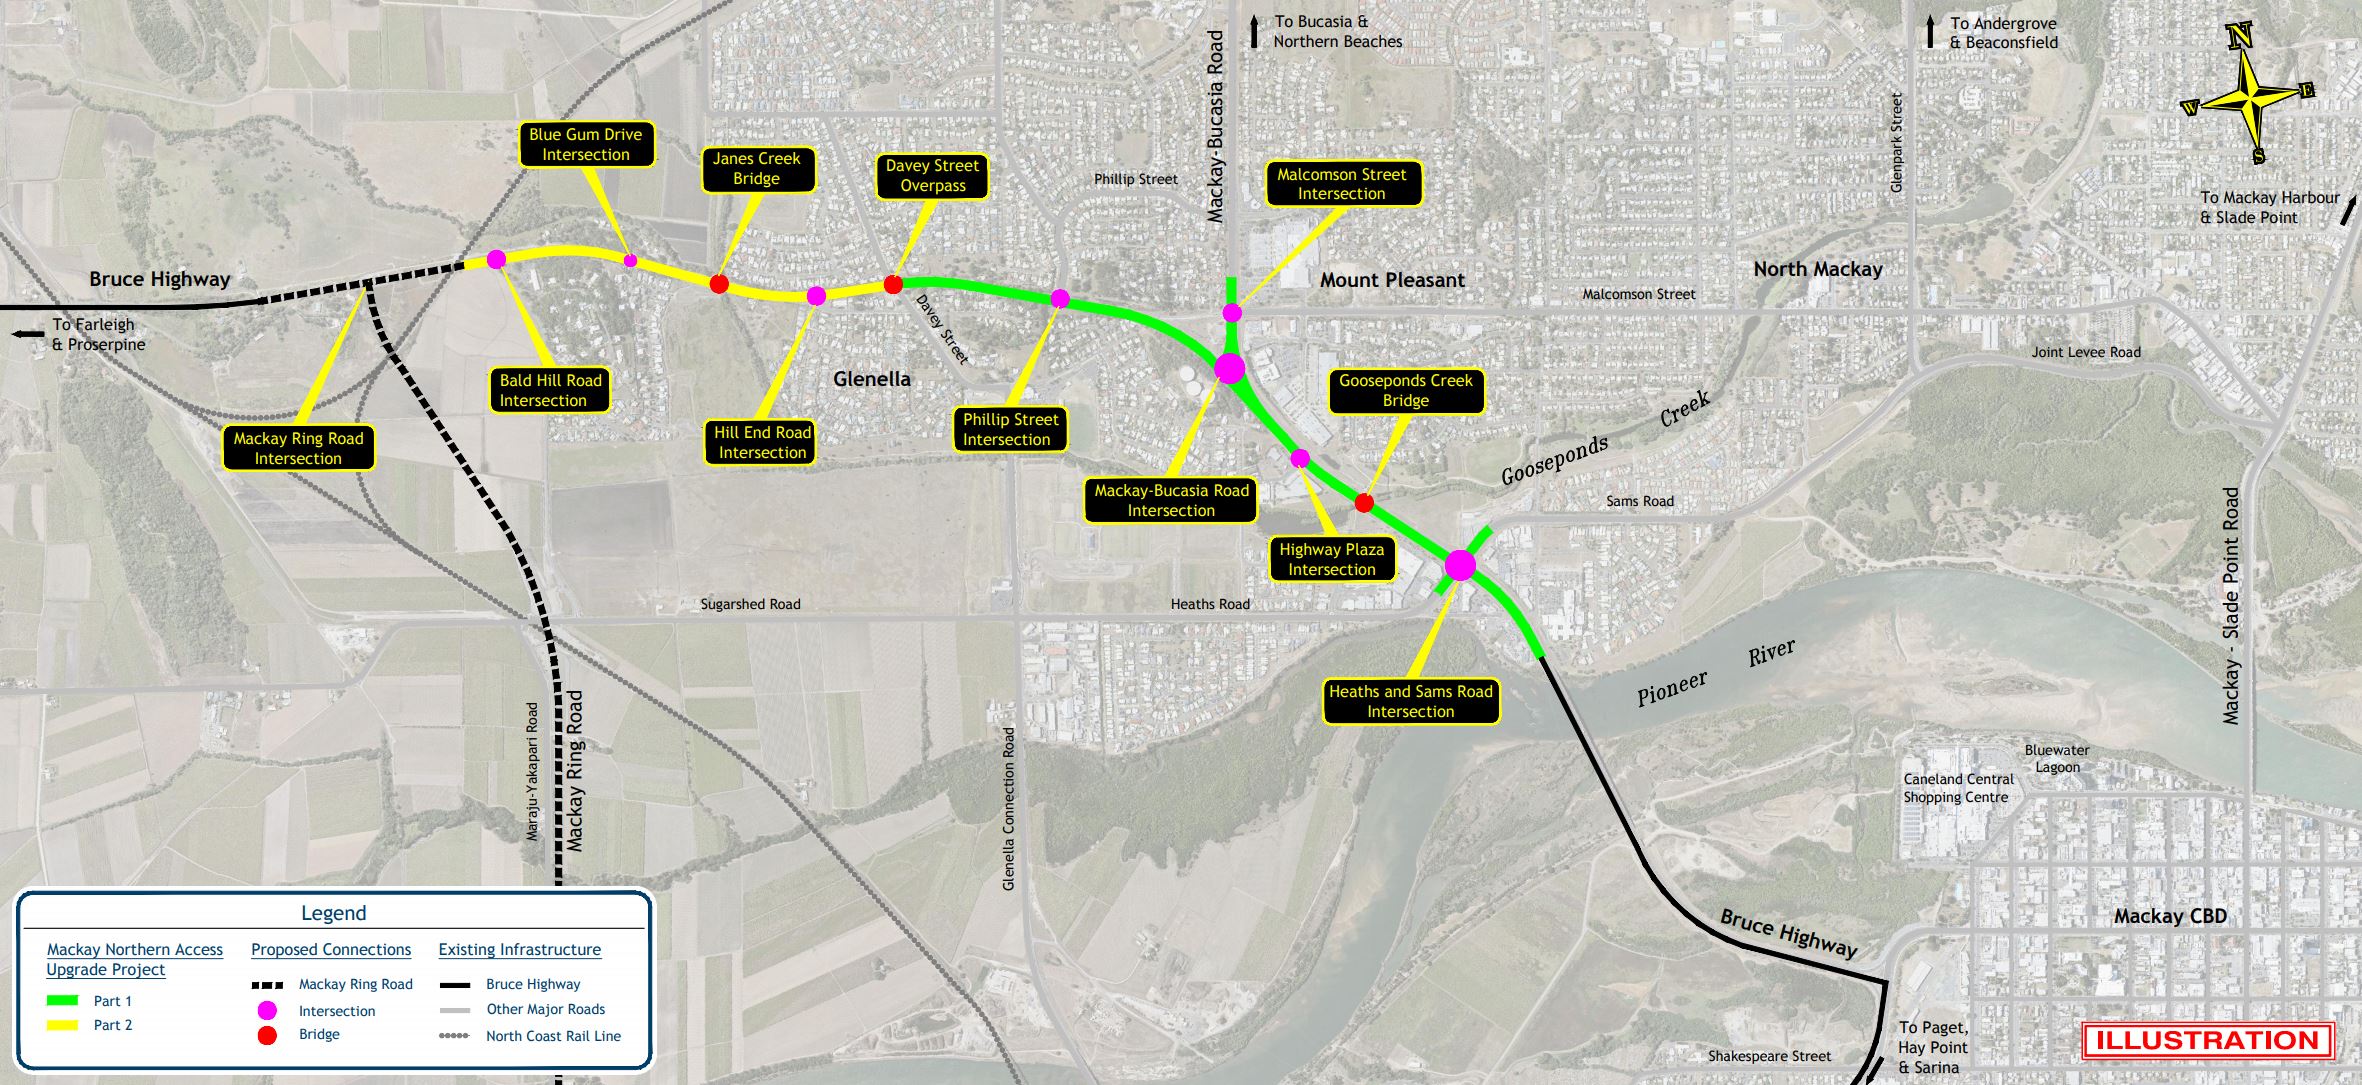 Mackay Northern Access Upgrade Project map overview